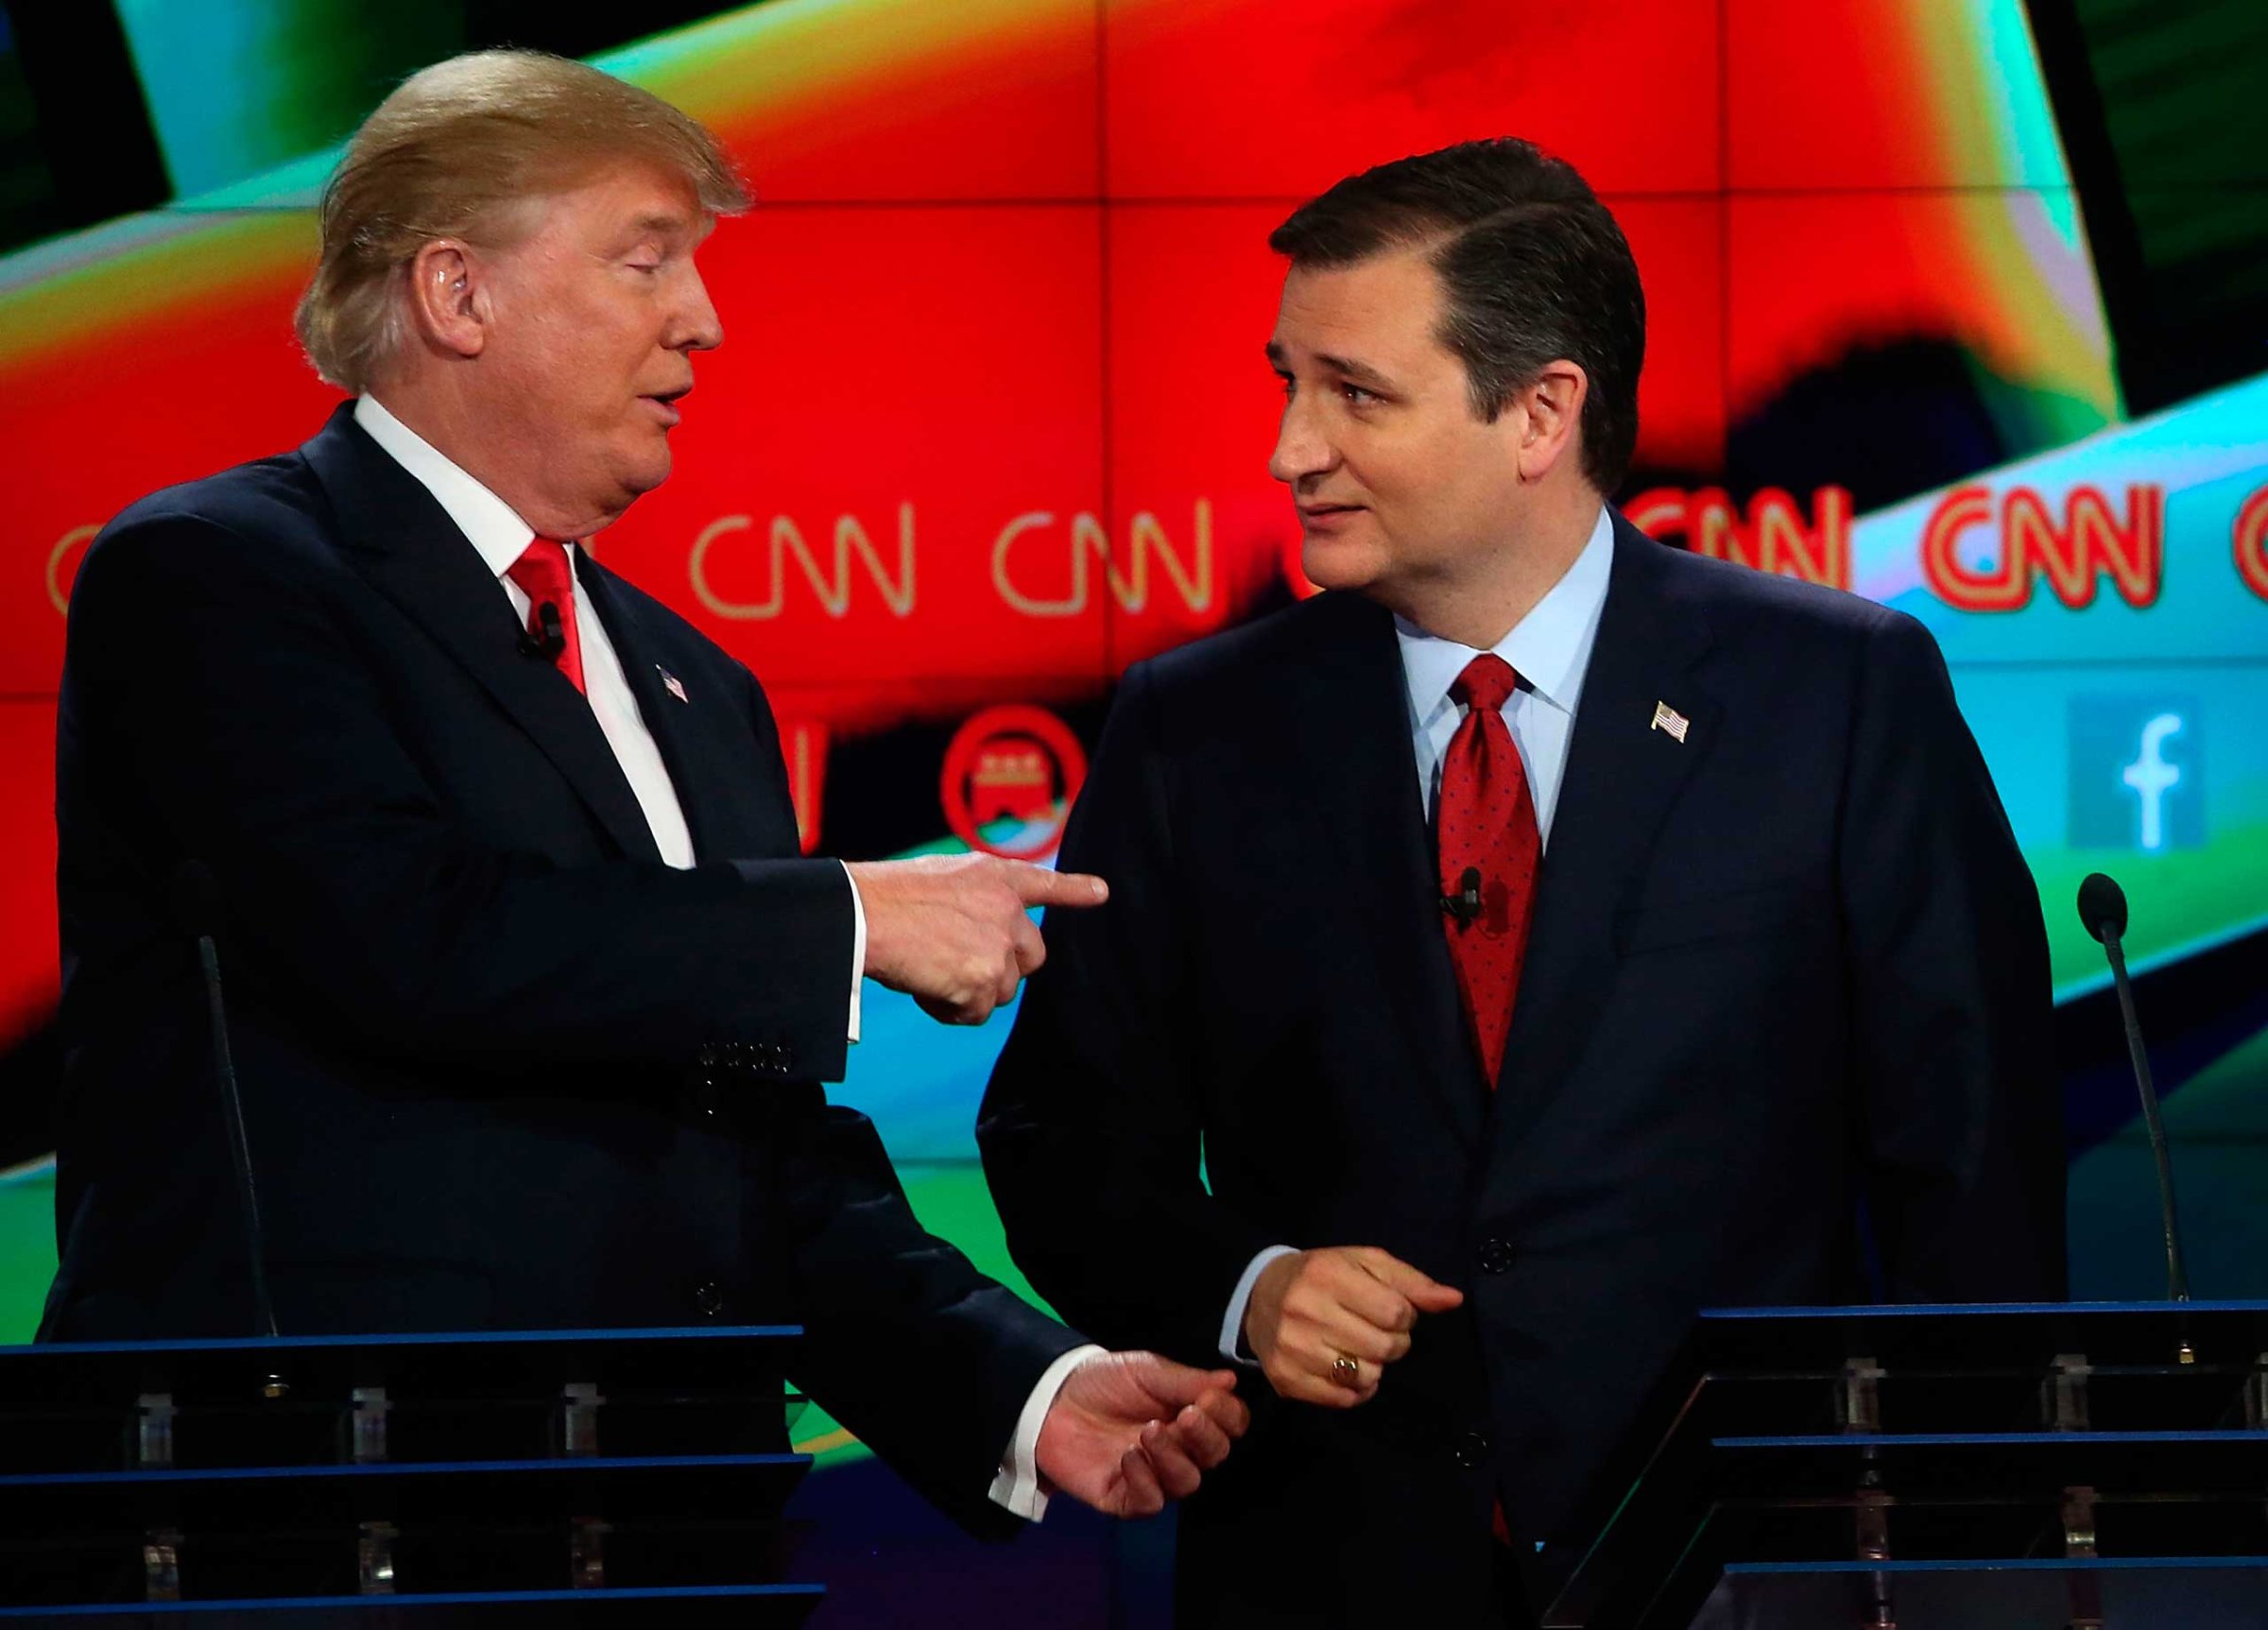 Republican presidential candidates Donald Trump and Sen. Ted Cruz (R-TX) interact at the conclusion of CNN's GOP presidential debate at The Venetian Las Vegas on Dec. 15, 2015.